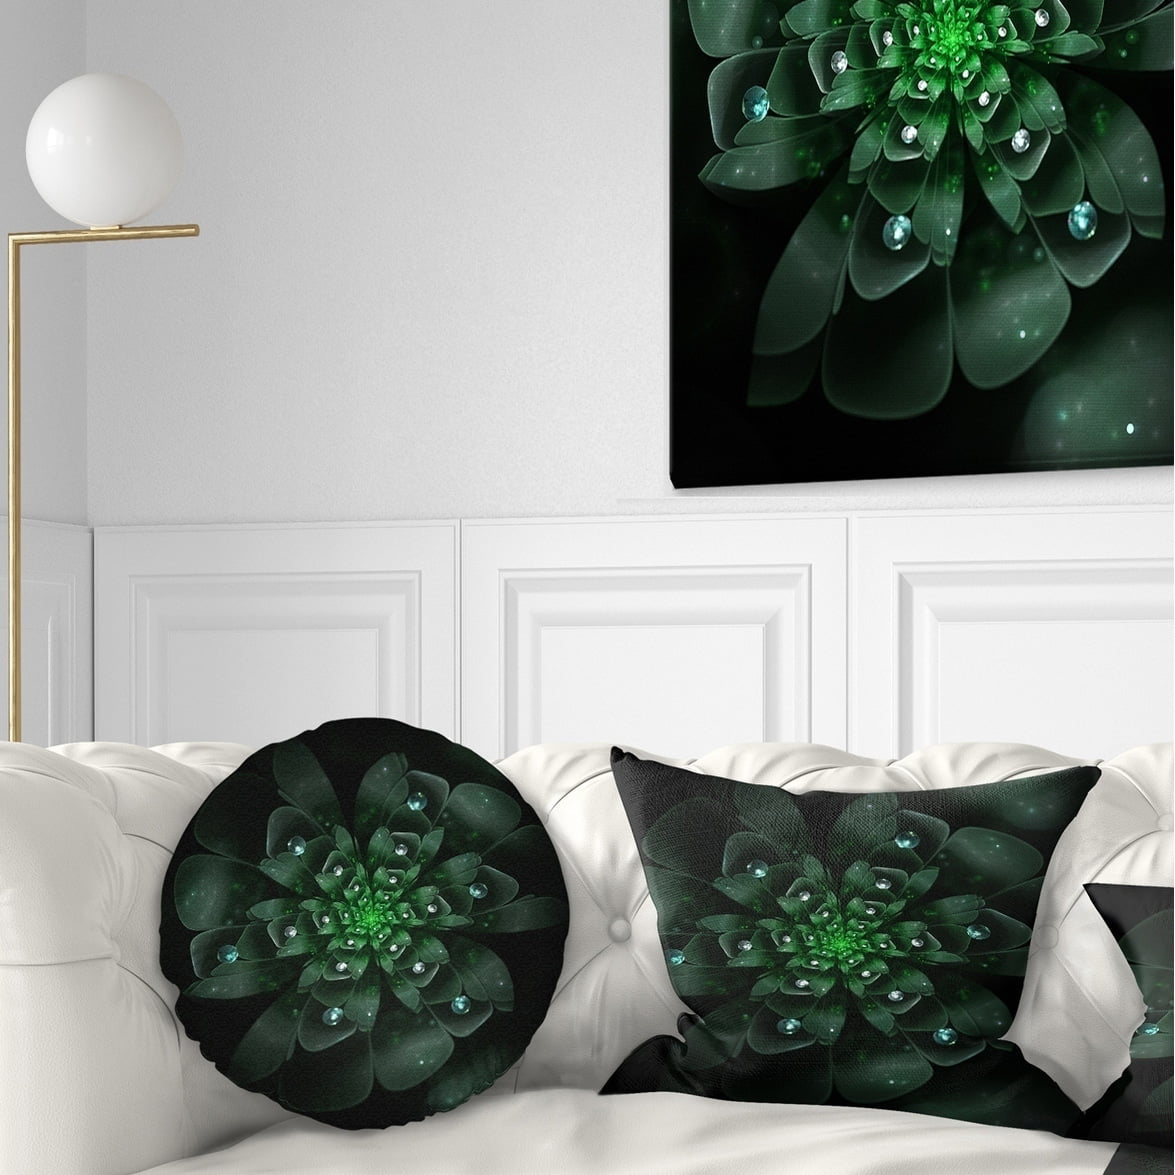 Sofa Throw Pillow 16 in x 16 in in Insert Printed On Both Side Designart CU12185-16-16 Glowing Crystal Green Fractal Flower Floral Cushion Cover for Living Room 